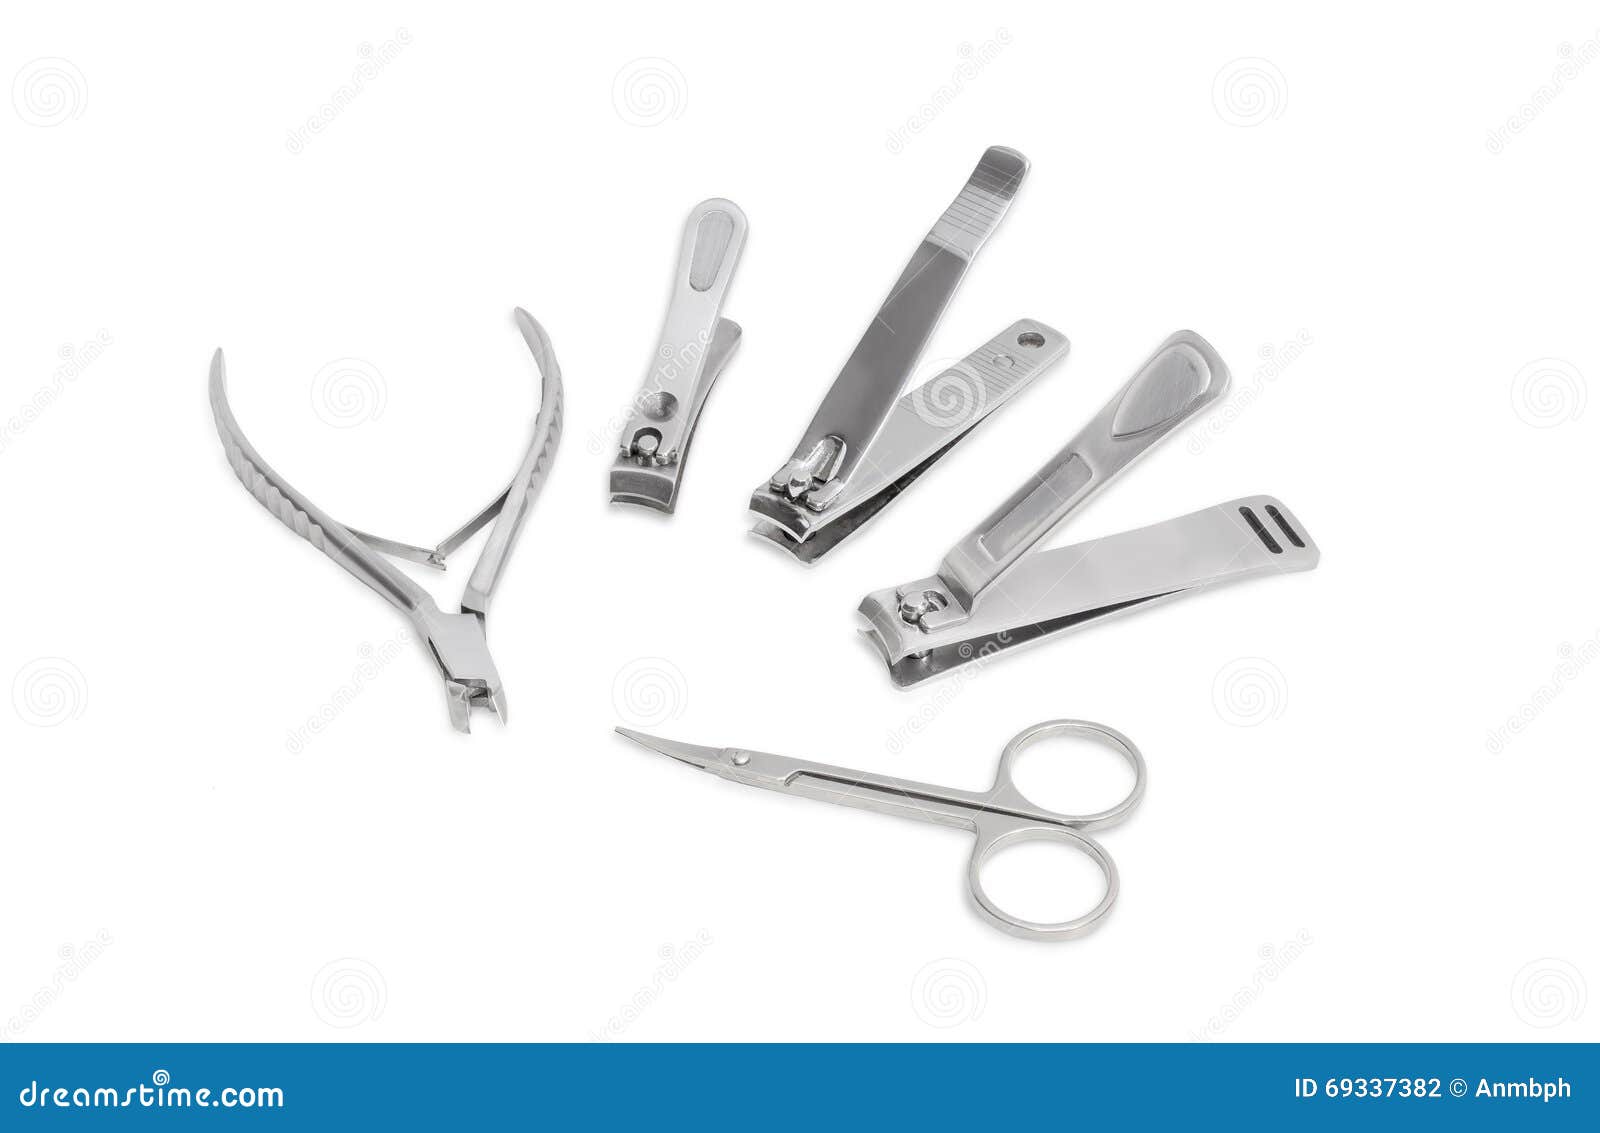 Several Nail Clippers Different Types and Sizes and Nail Scissor Stock  Photo - Image of scissors, attractiveness: 69337382